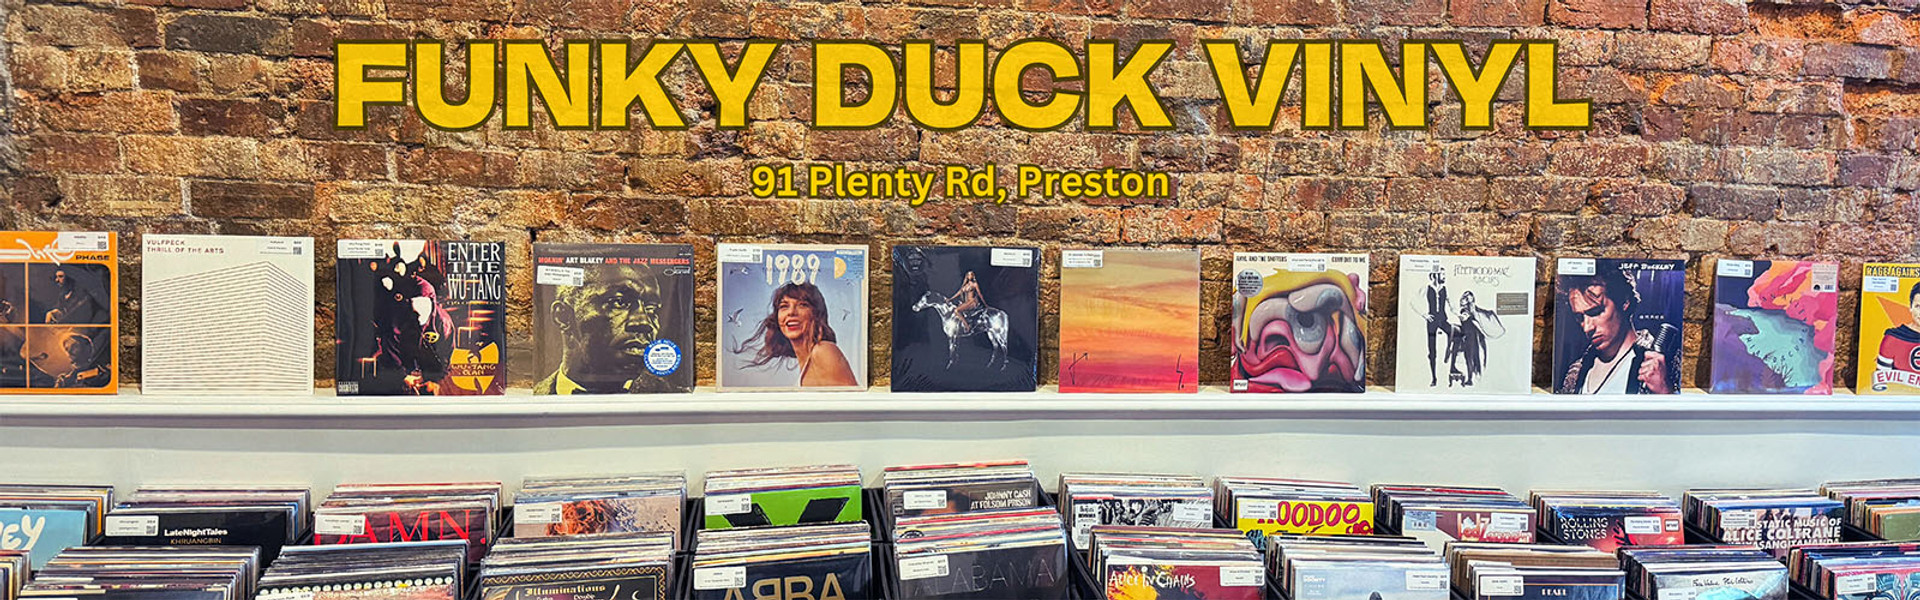 Website Banner picture of the inside of Funky Duck Vinyl Record Store at 91 Plenty Rd, Preston in Melbourne showing  a collection of vinyl records against a brick wall